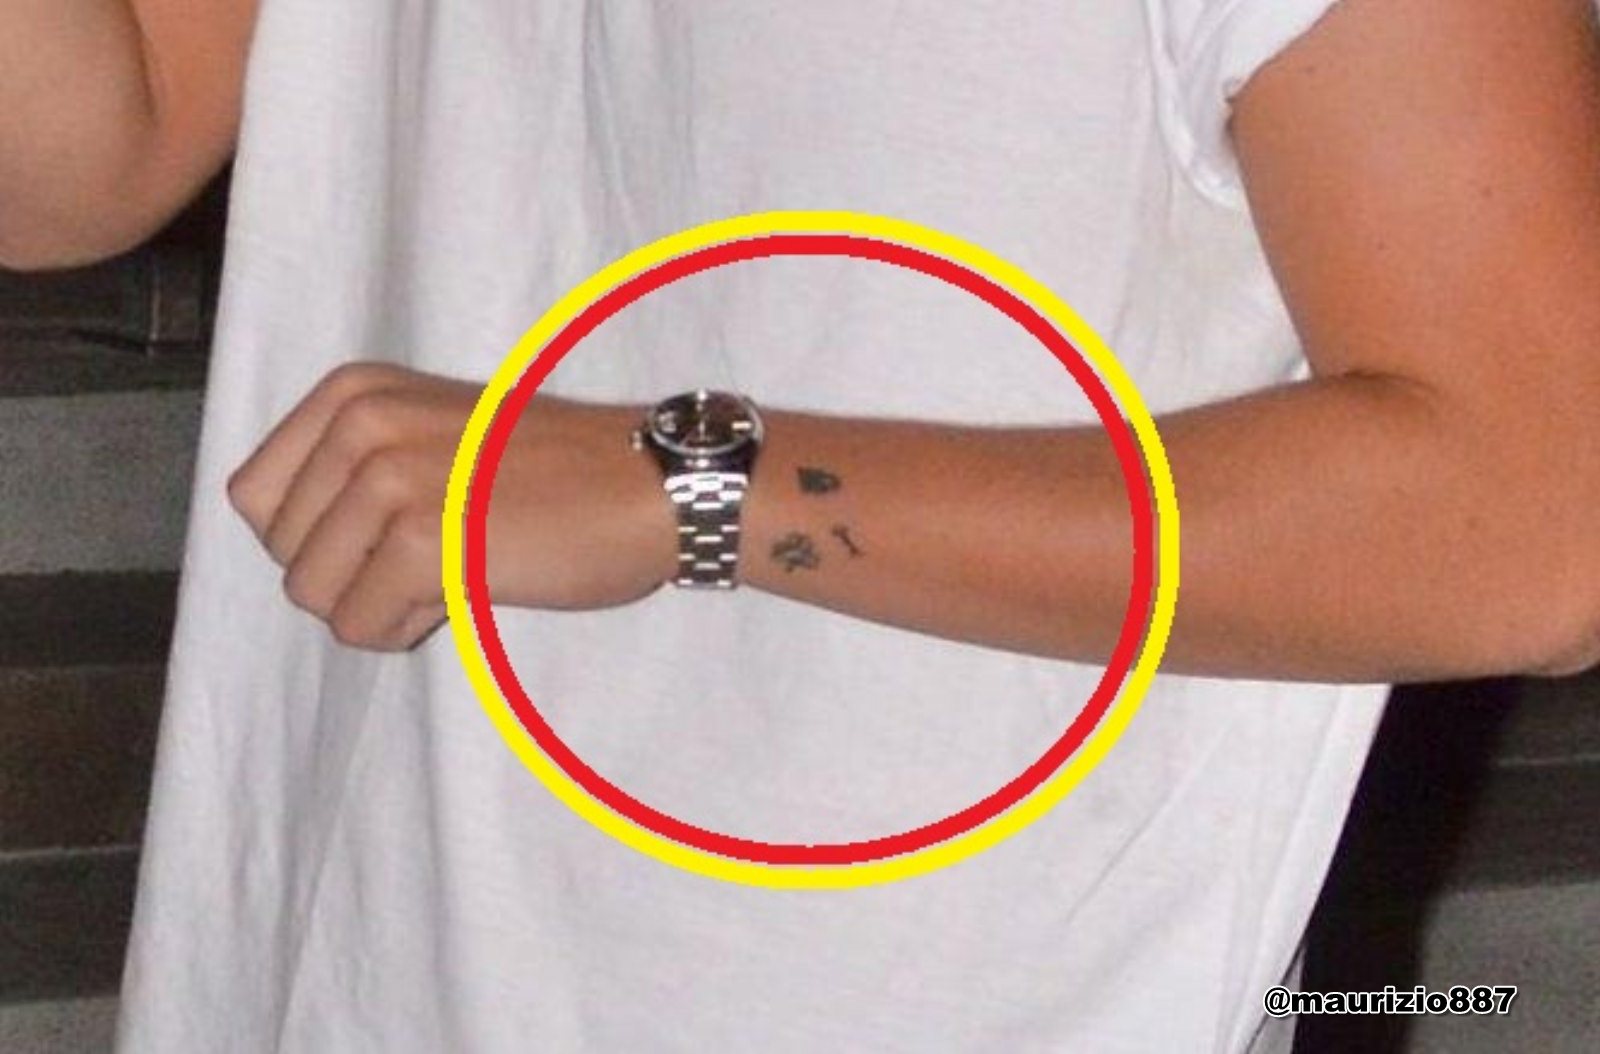 Harry styles new Tattoo 2012   One Direction Photo 32365958 1600x1054